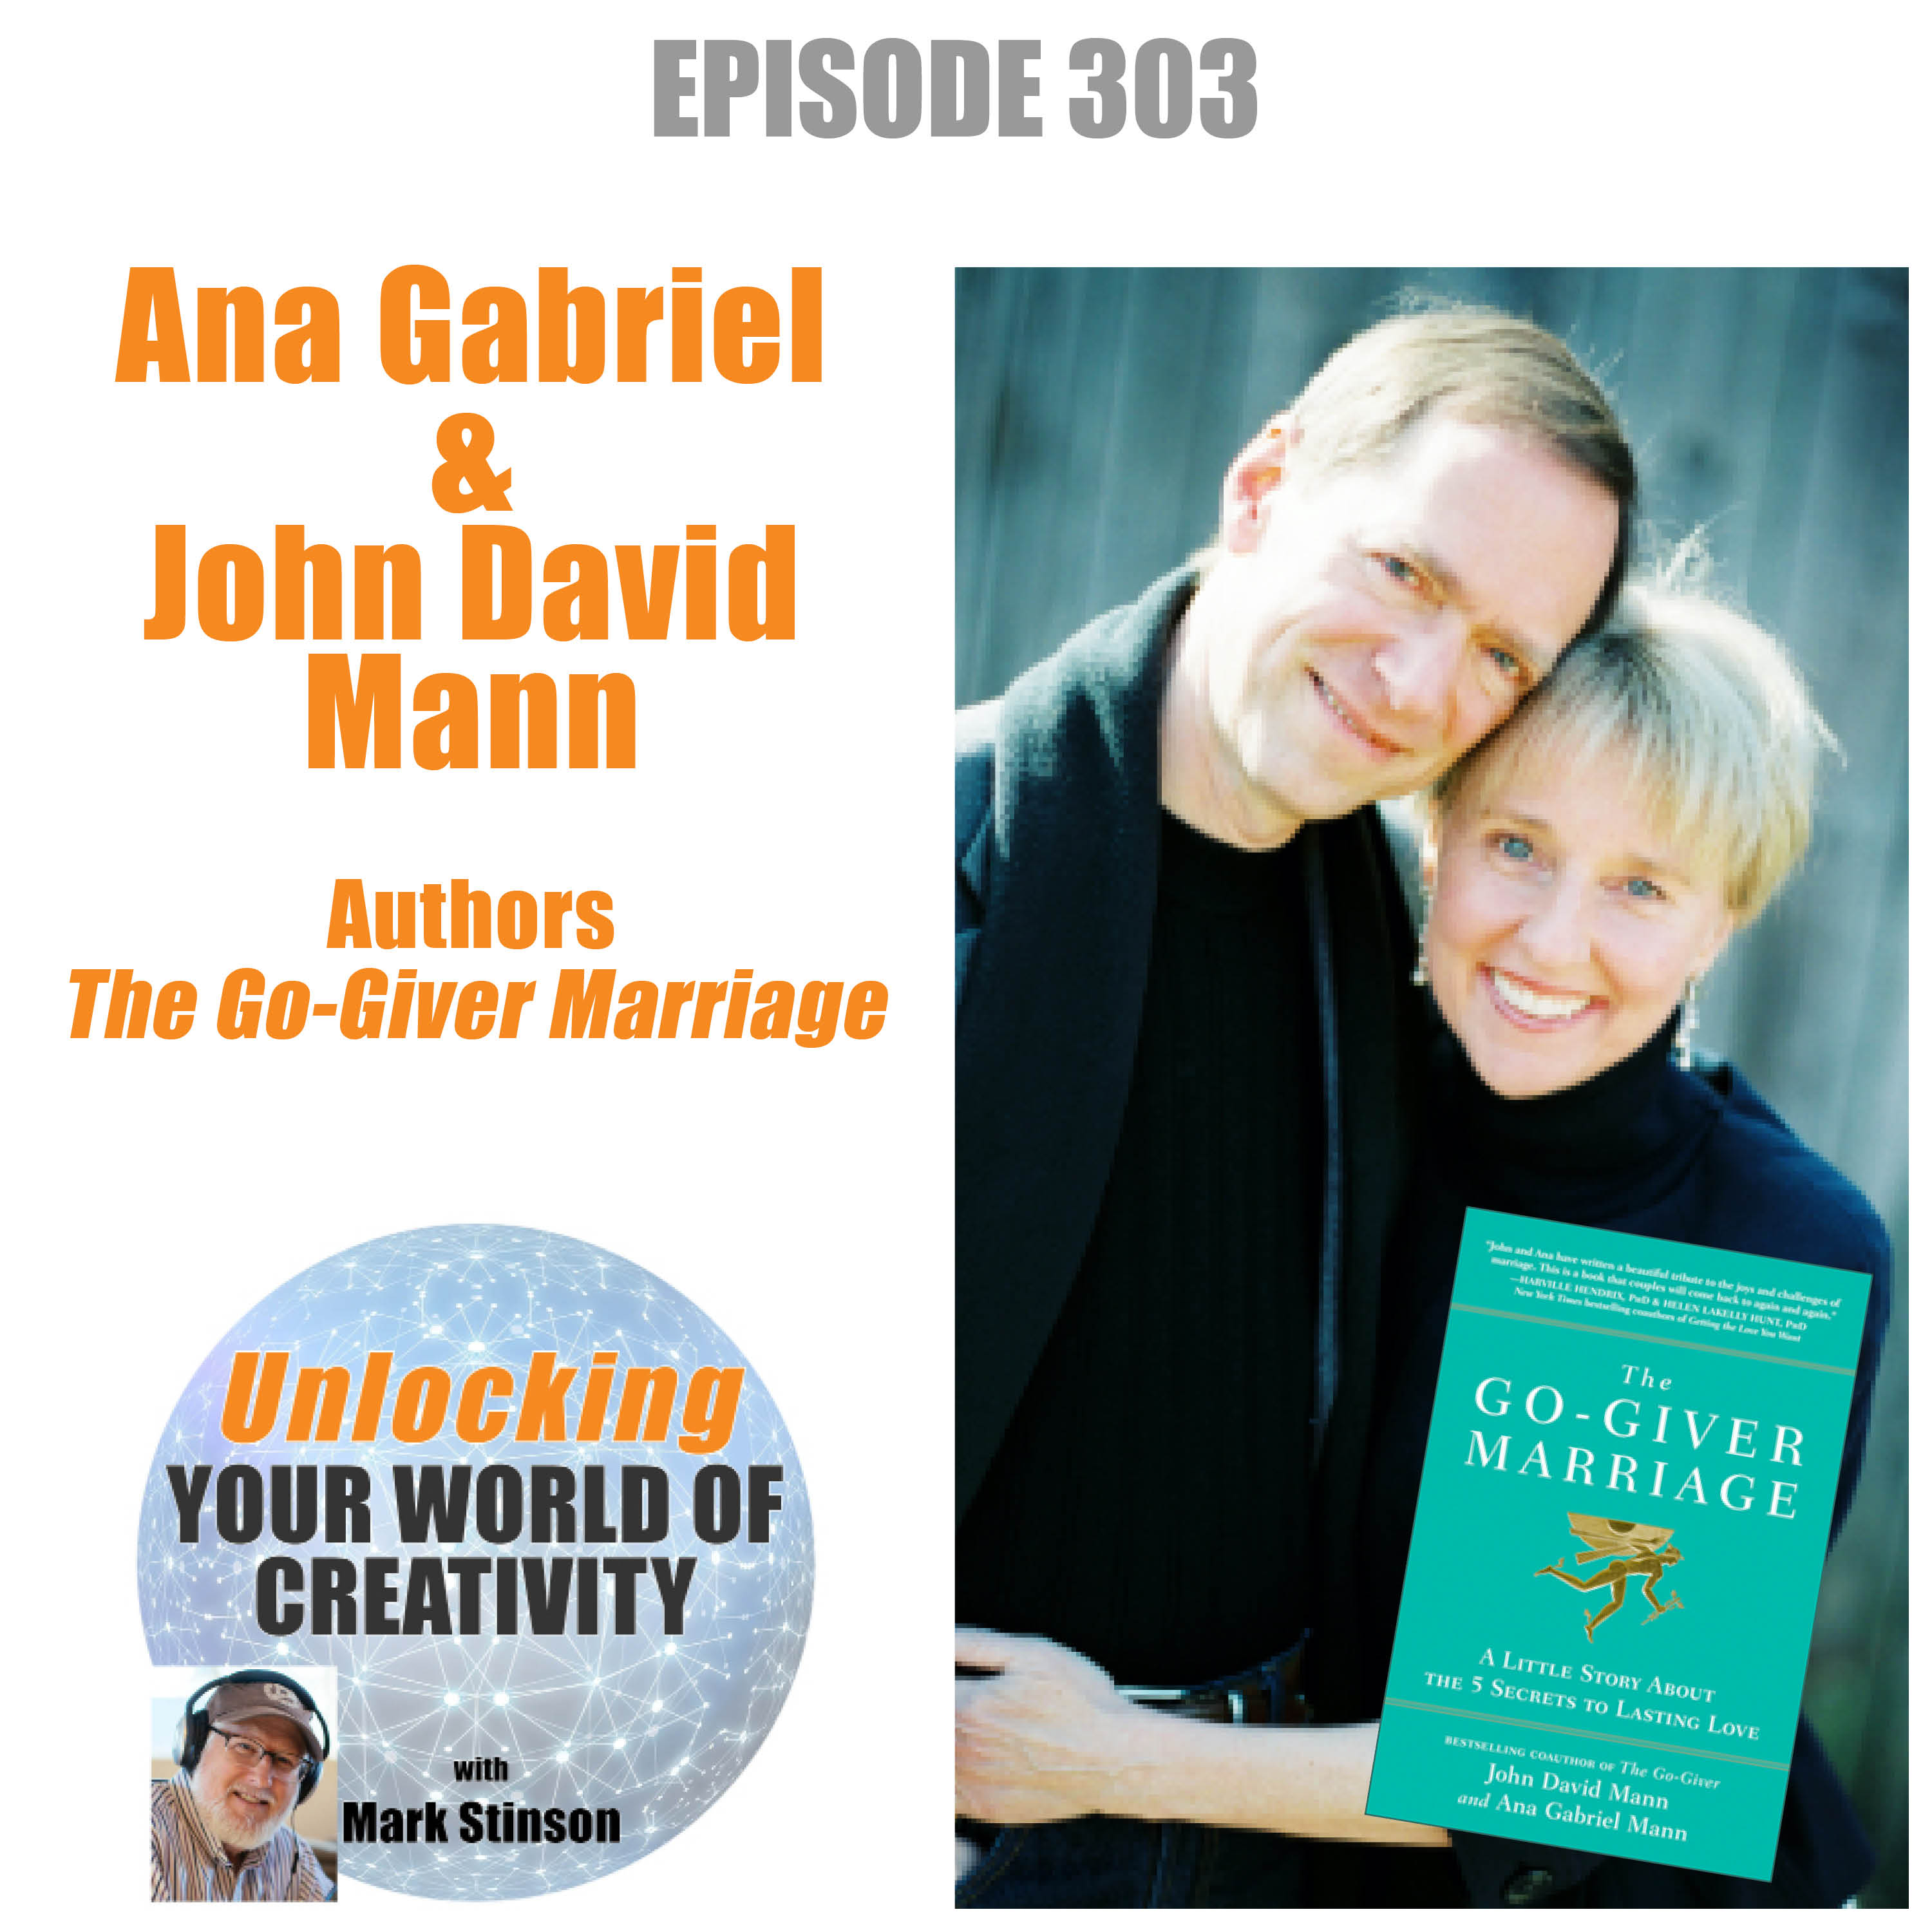 Ana Gabriel and John David Mann, Authors of “The Go-Giver Marriage”